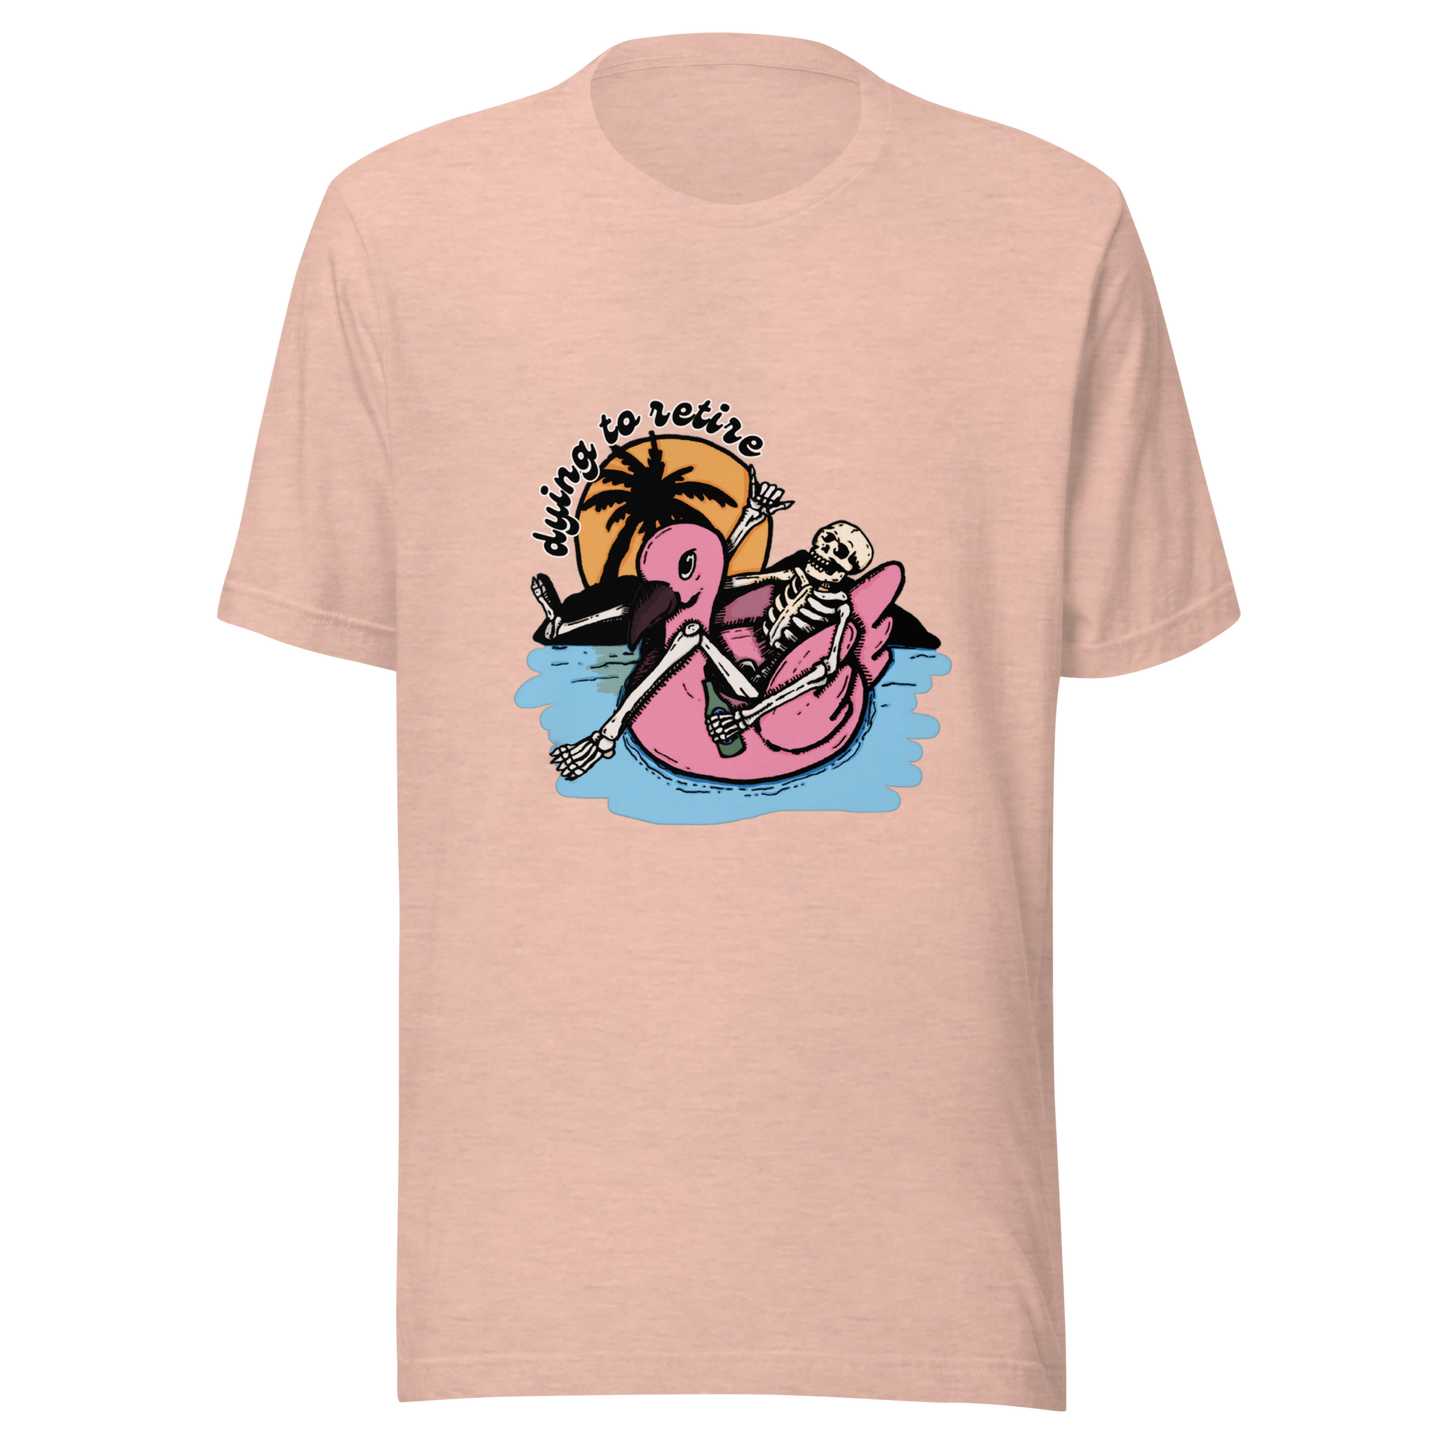 dying to retire t-shirt model in peach - gaslit apparel